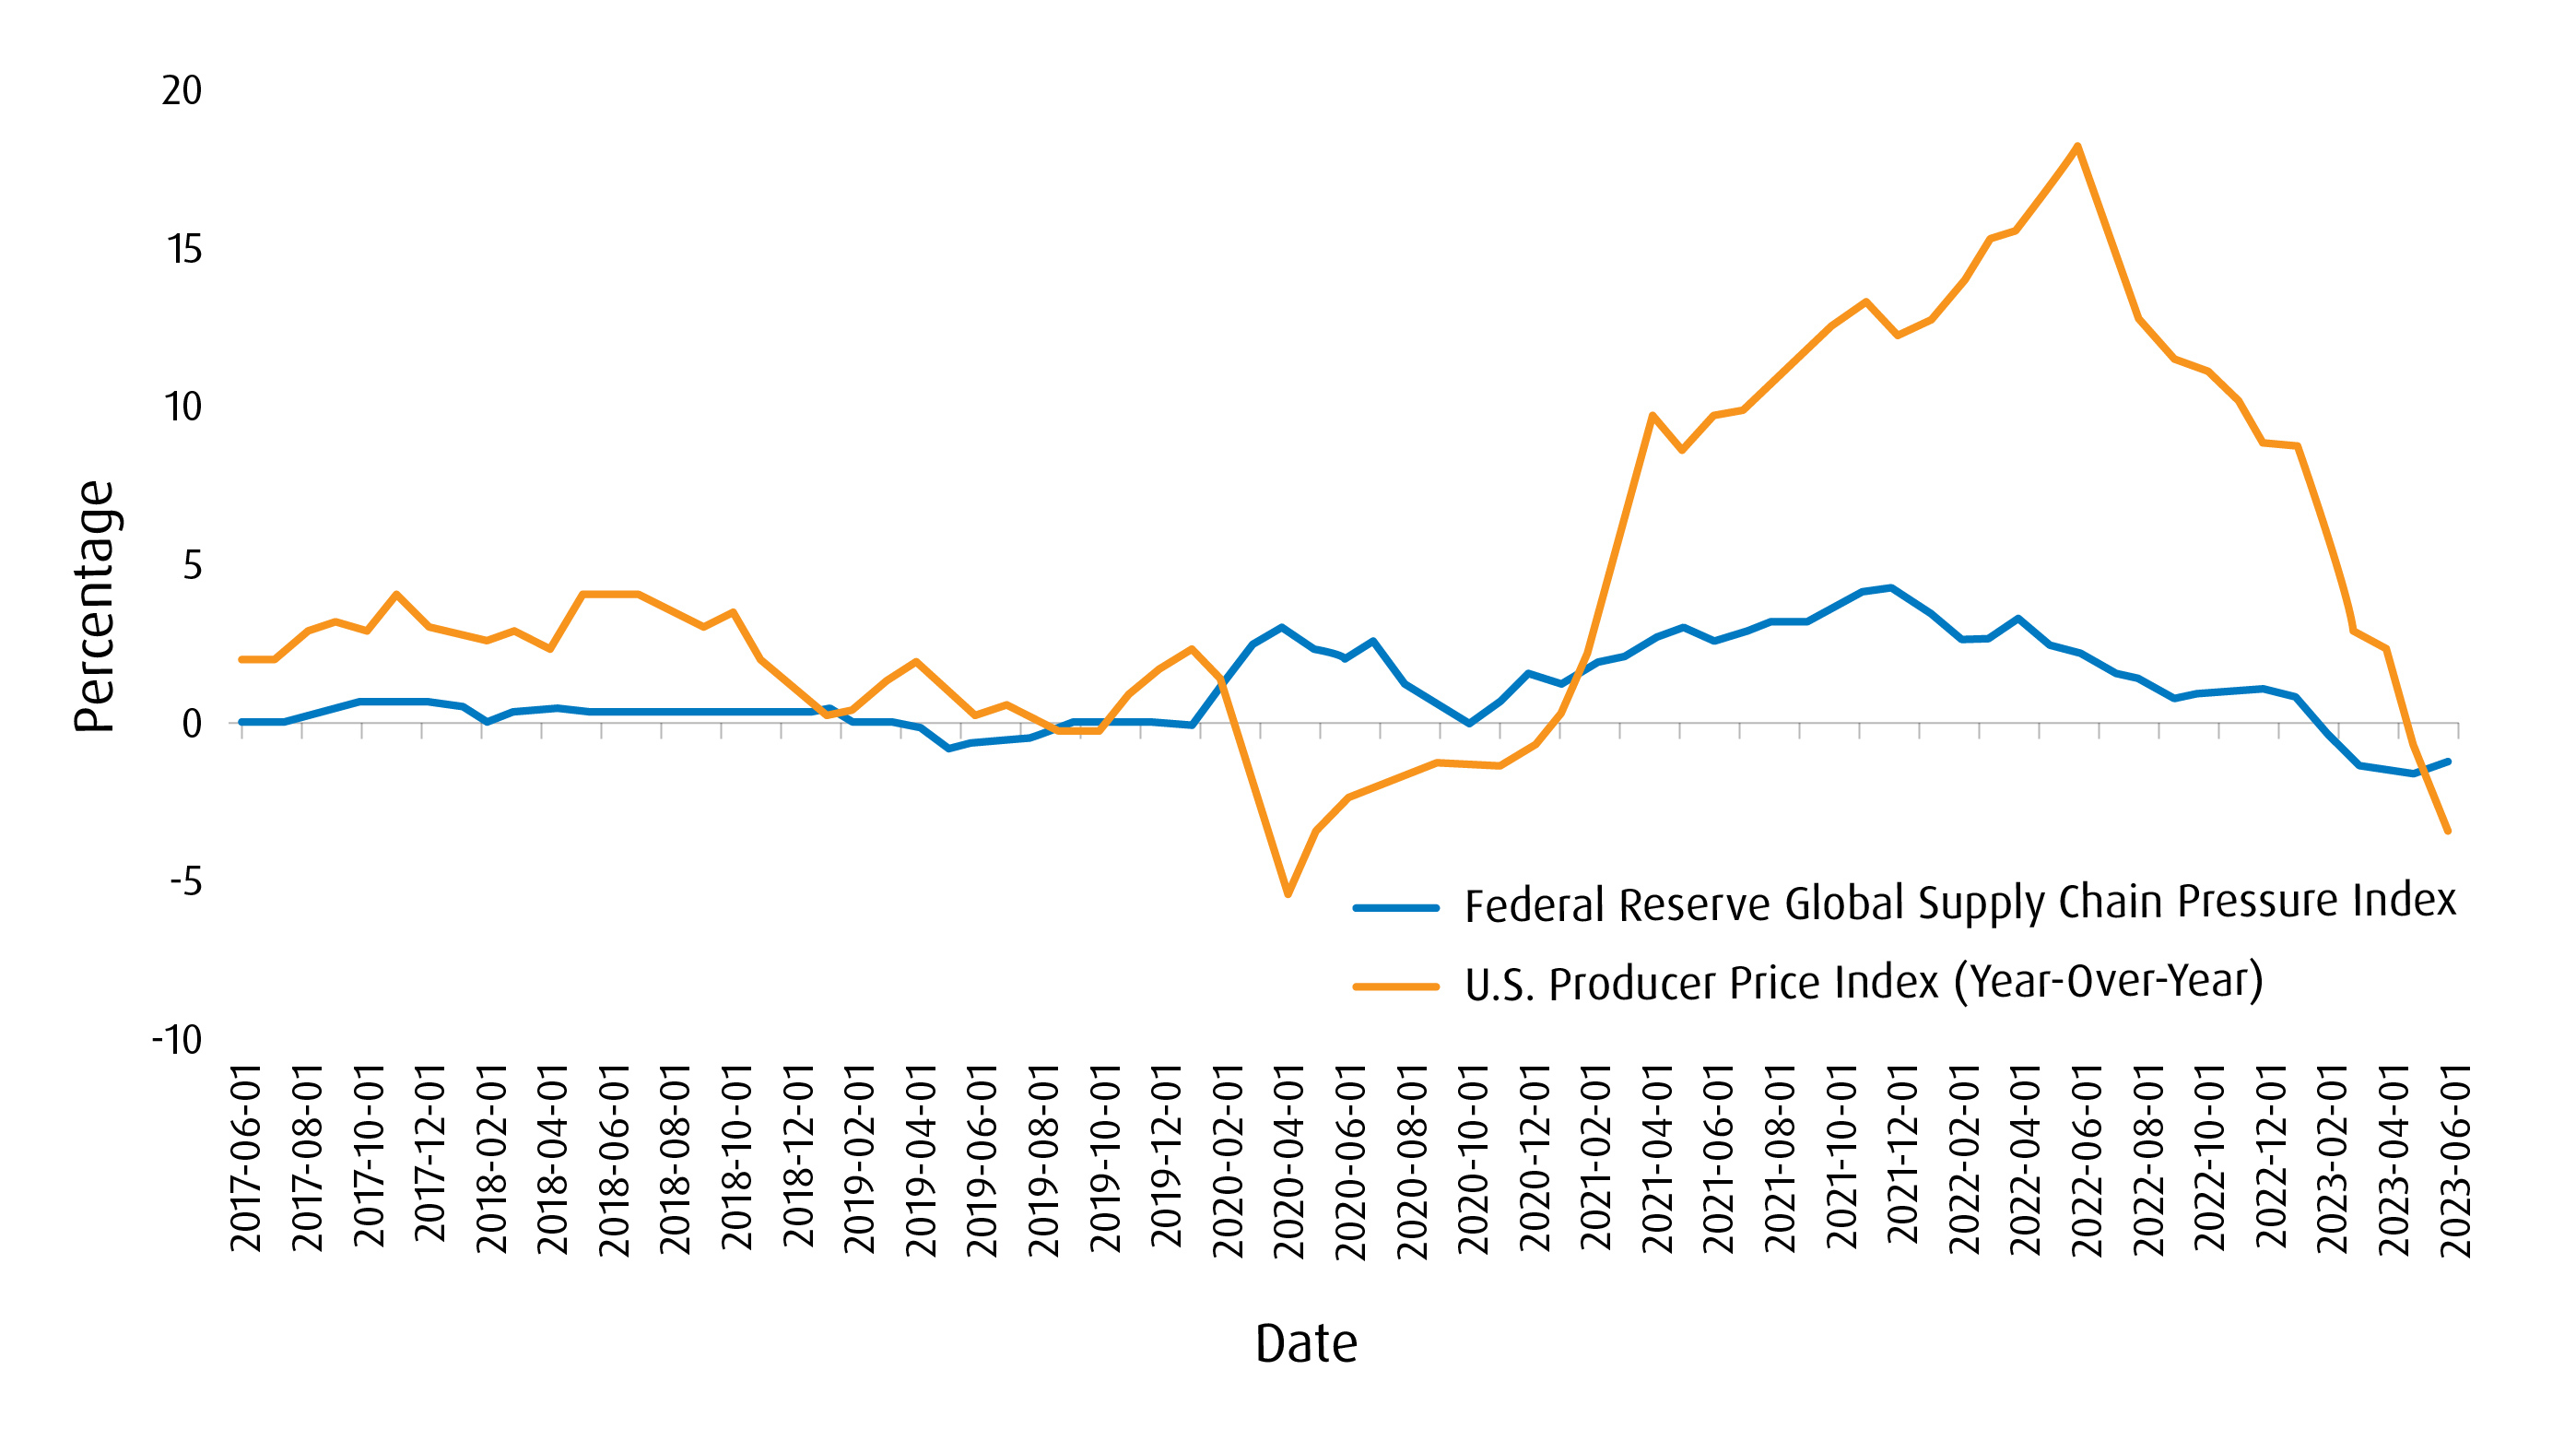 Federal Reserve Global Supply Chain Pressure Index and. U.S. Producer Price Index have normalized